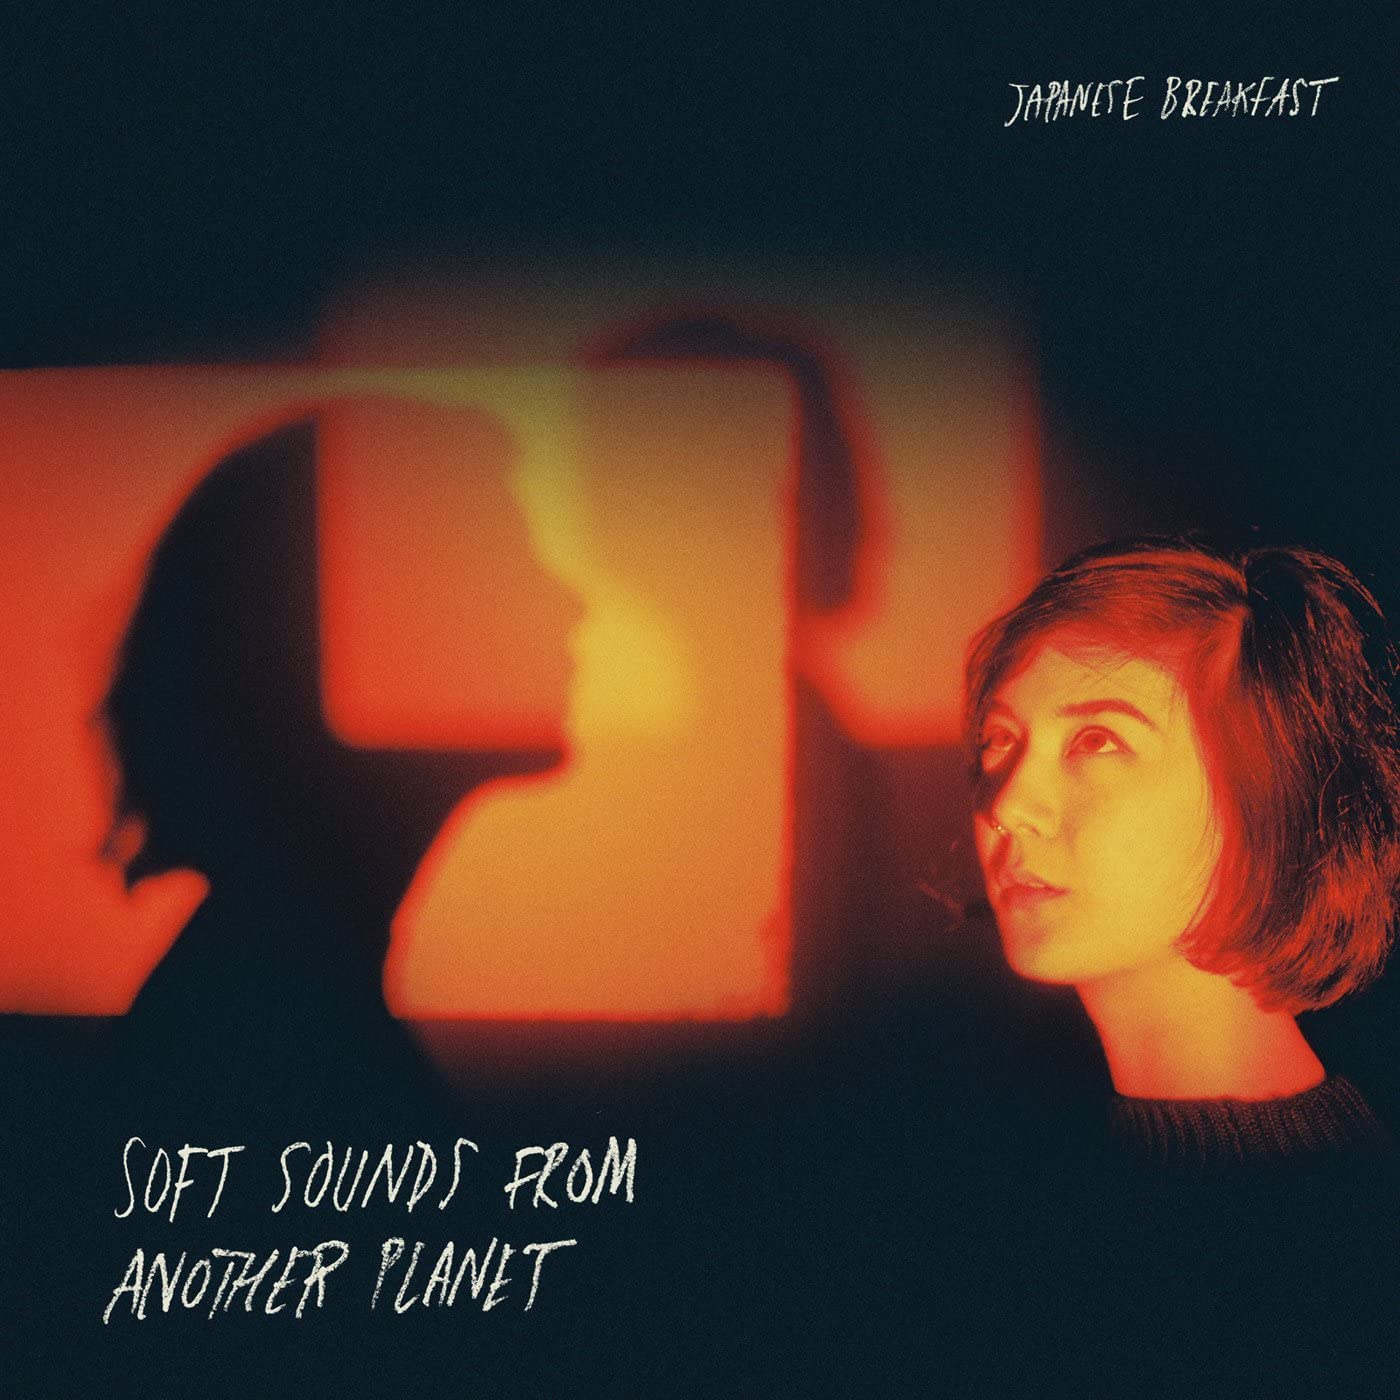 Japanese Breakfast - Soft Sounds From Another Planet - CD